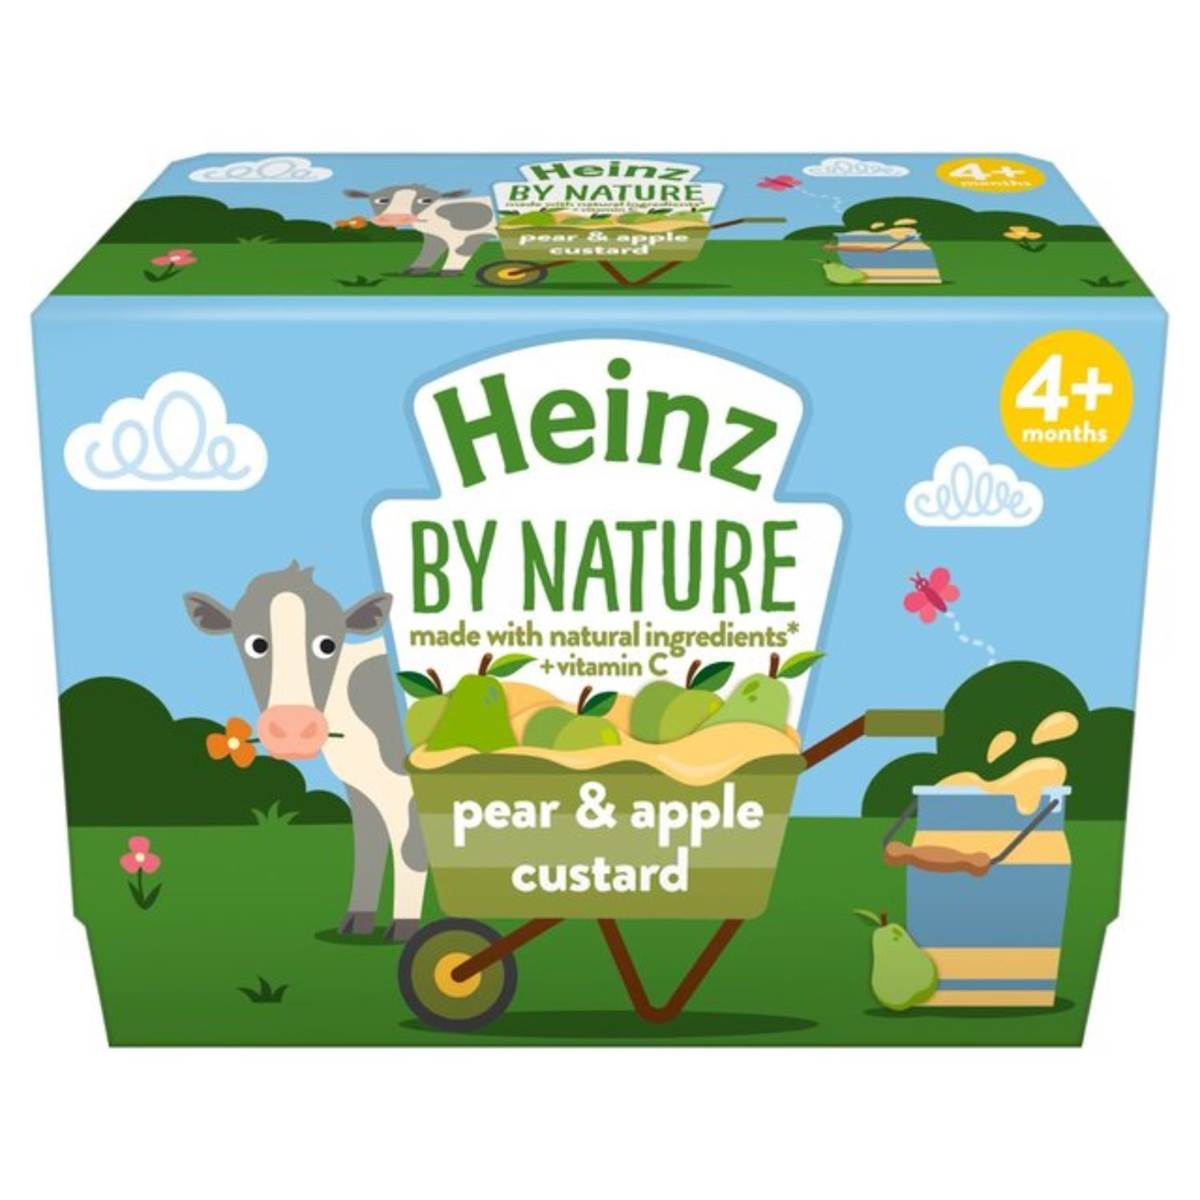 Heinz by Nature Pear & Apple Custrad (Pack of 4) - 400g (4x100g)